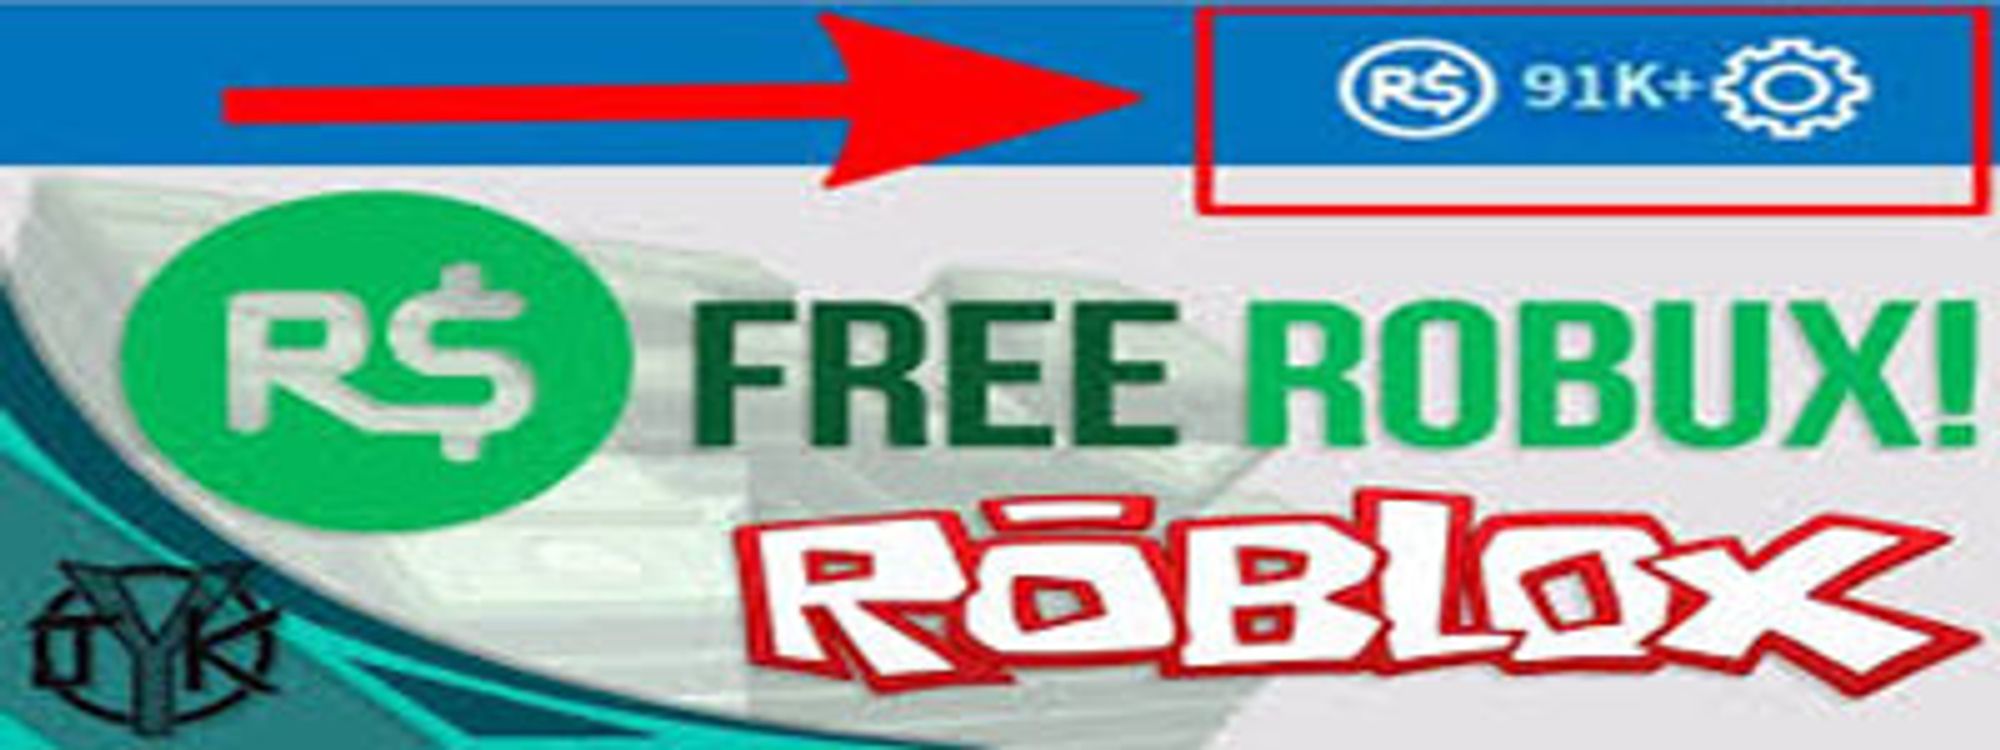 Roblox Robux Free Roblox Robux Codes With Skins Password Account 2020 - robux generator app free roblox rbxvault